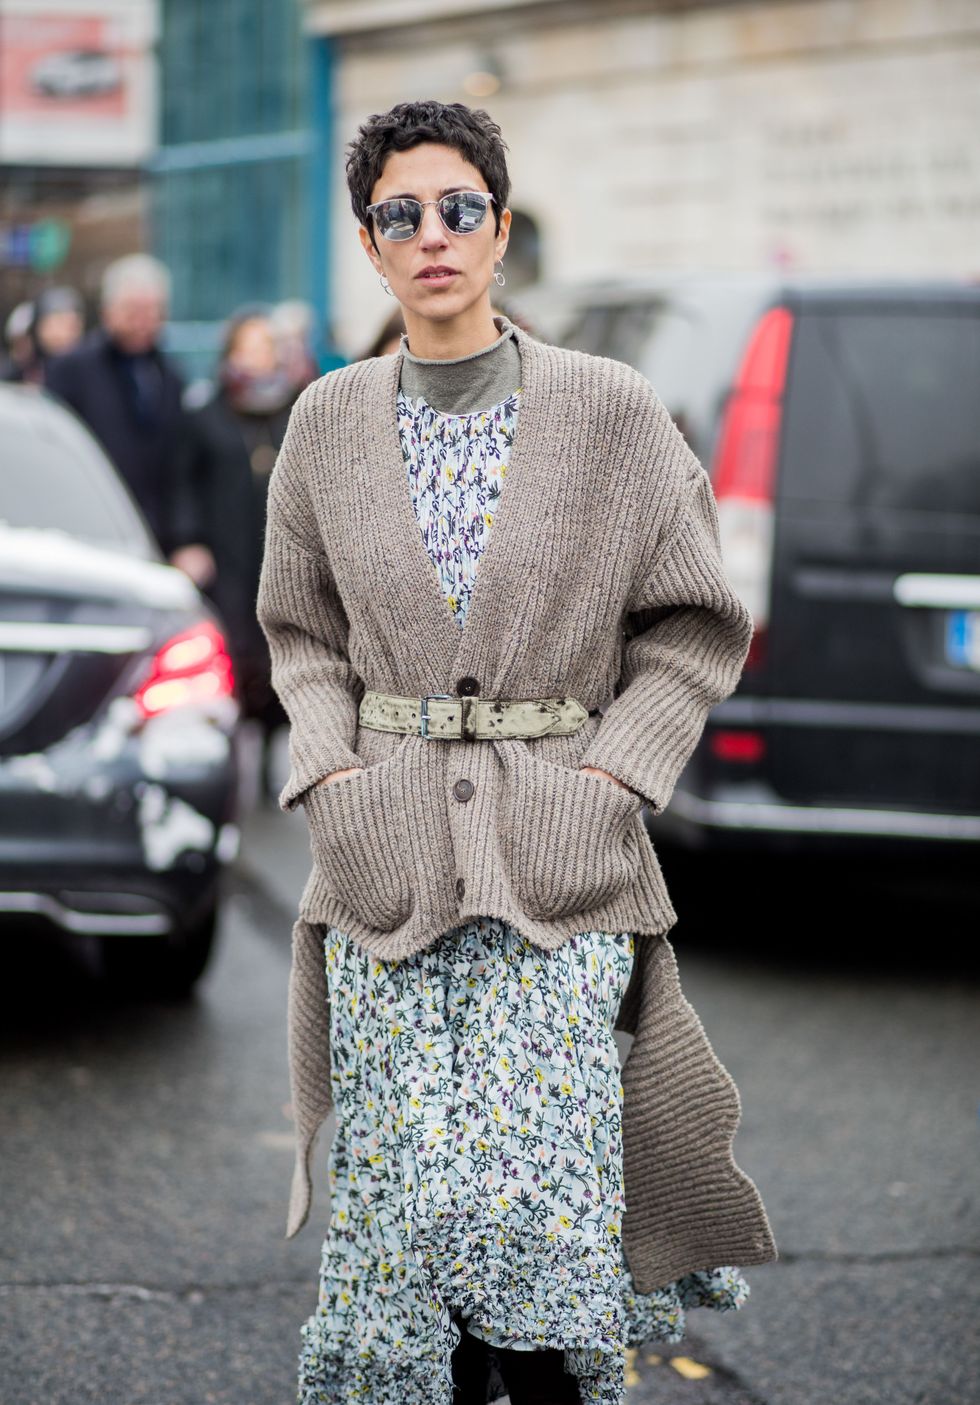 PARIS, FRANCE - MARCH 01: Yasmin Sewell wearing cardigan, dress with floral print is seen outside Chloe on March 1, 2018 in Paris, France. (Photo by Christian Vierig/Getty Images)